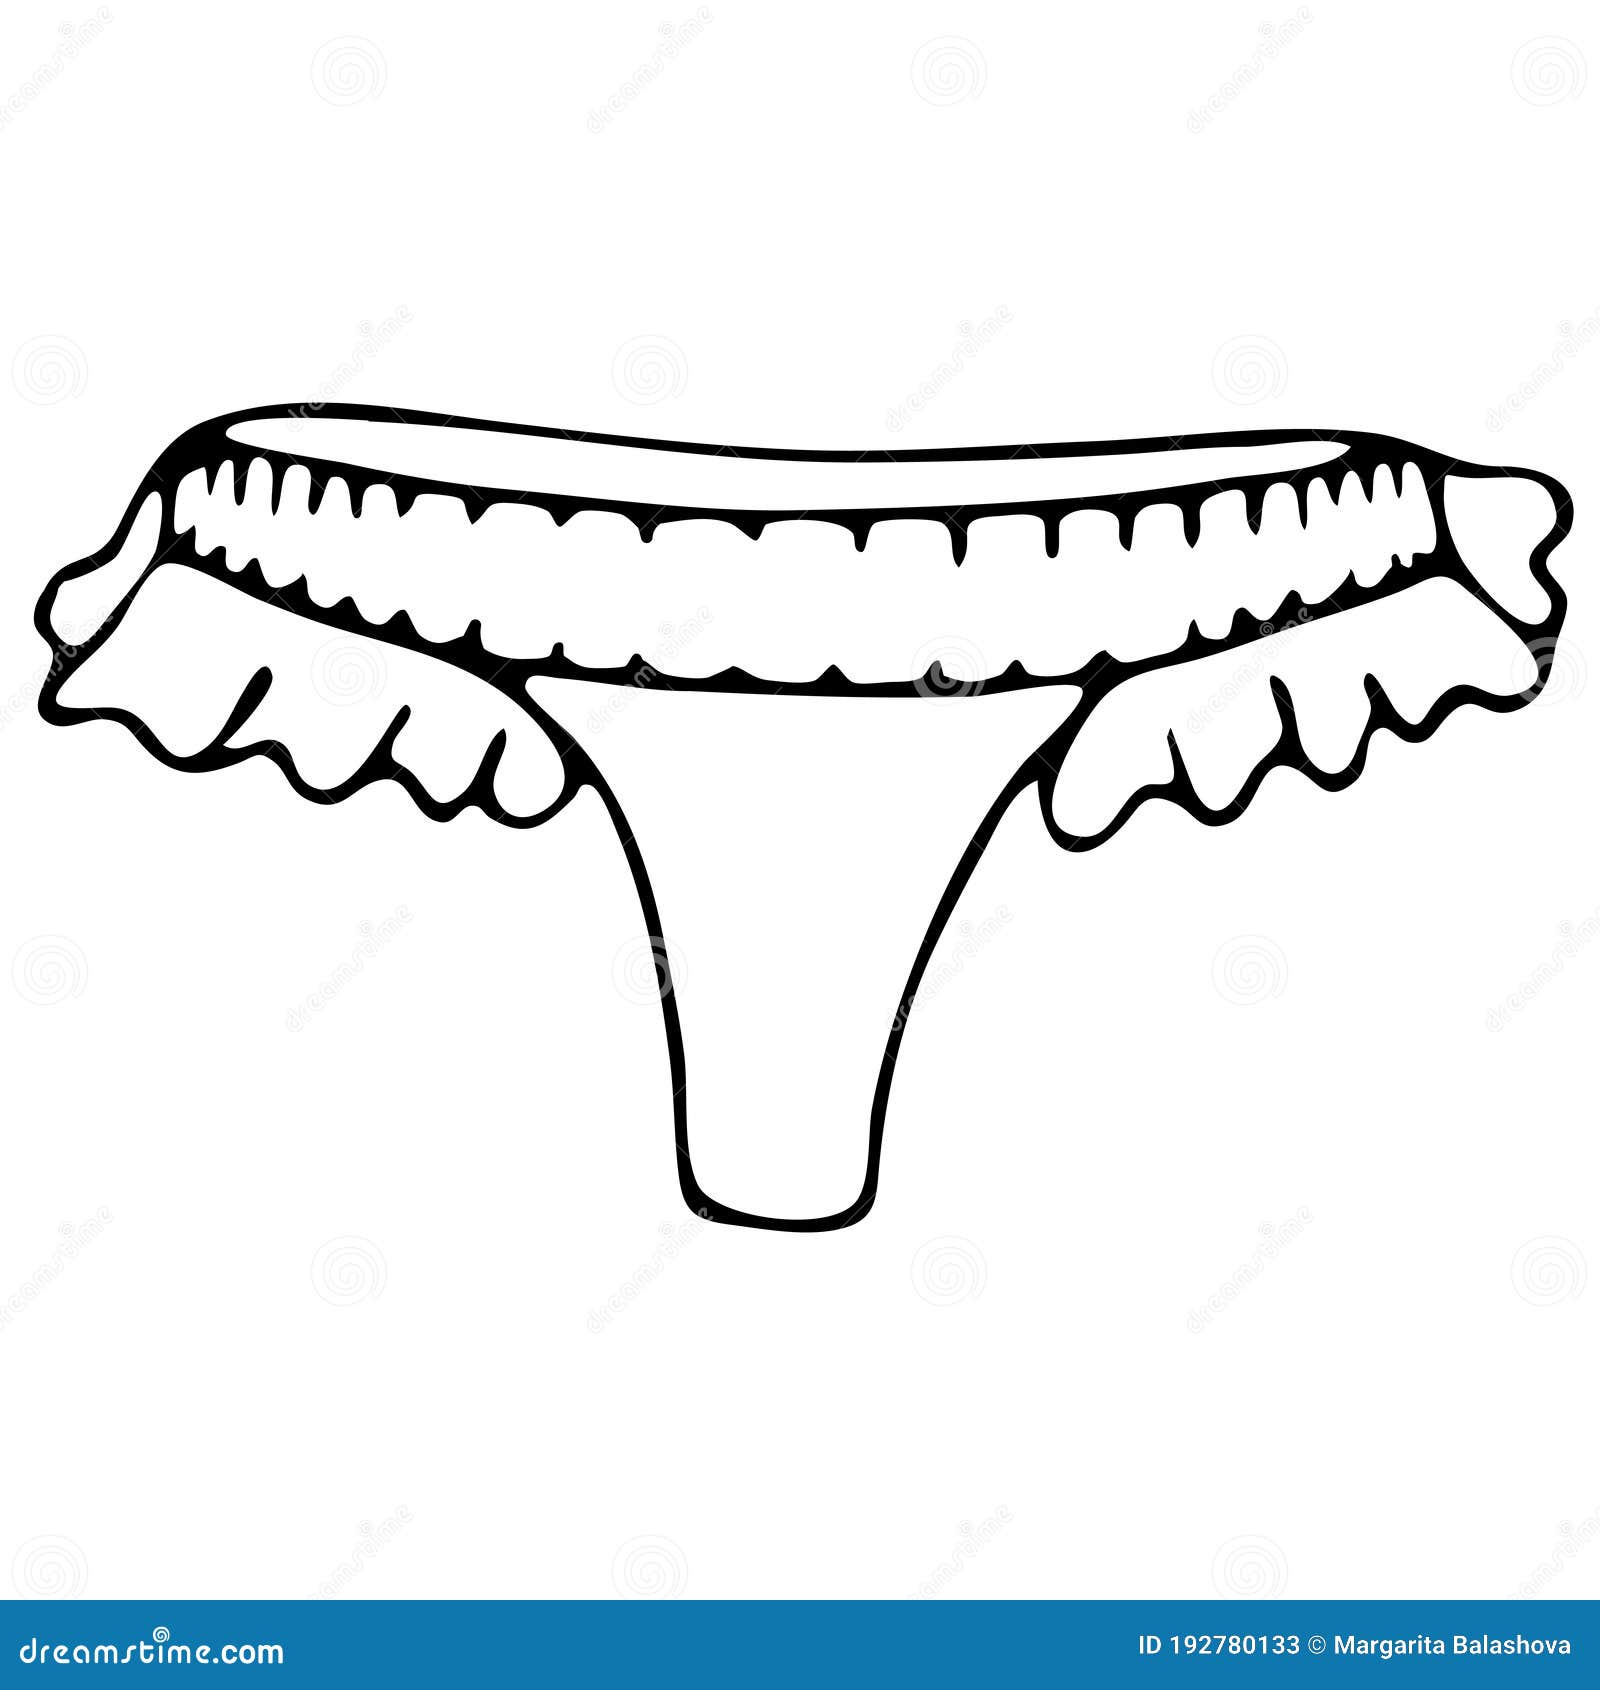 Underwear for Women - Cute Lace Briefs with Ruffles, Vector Elements in  Doodle Style with Black Outline Stock Vector - Illustration of figure,  feminine: 192780133